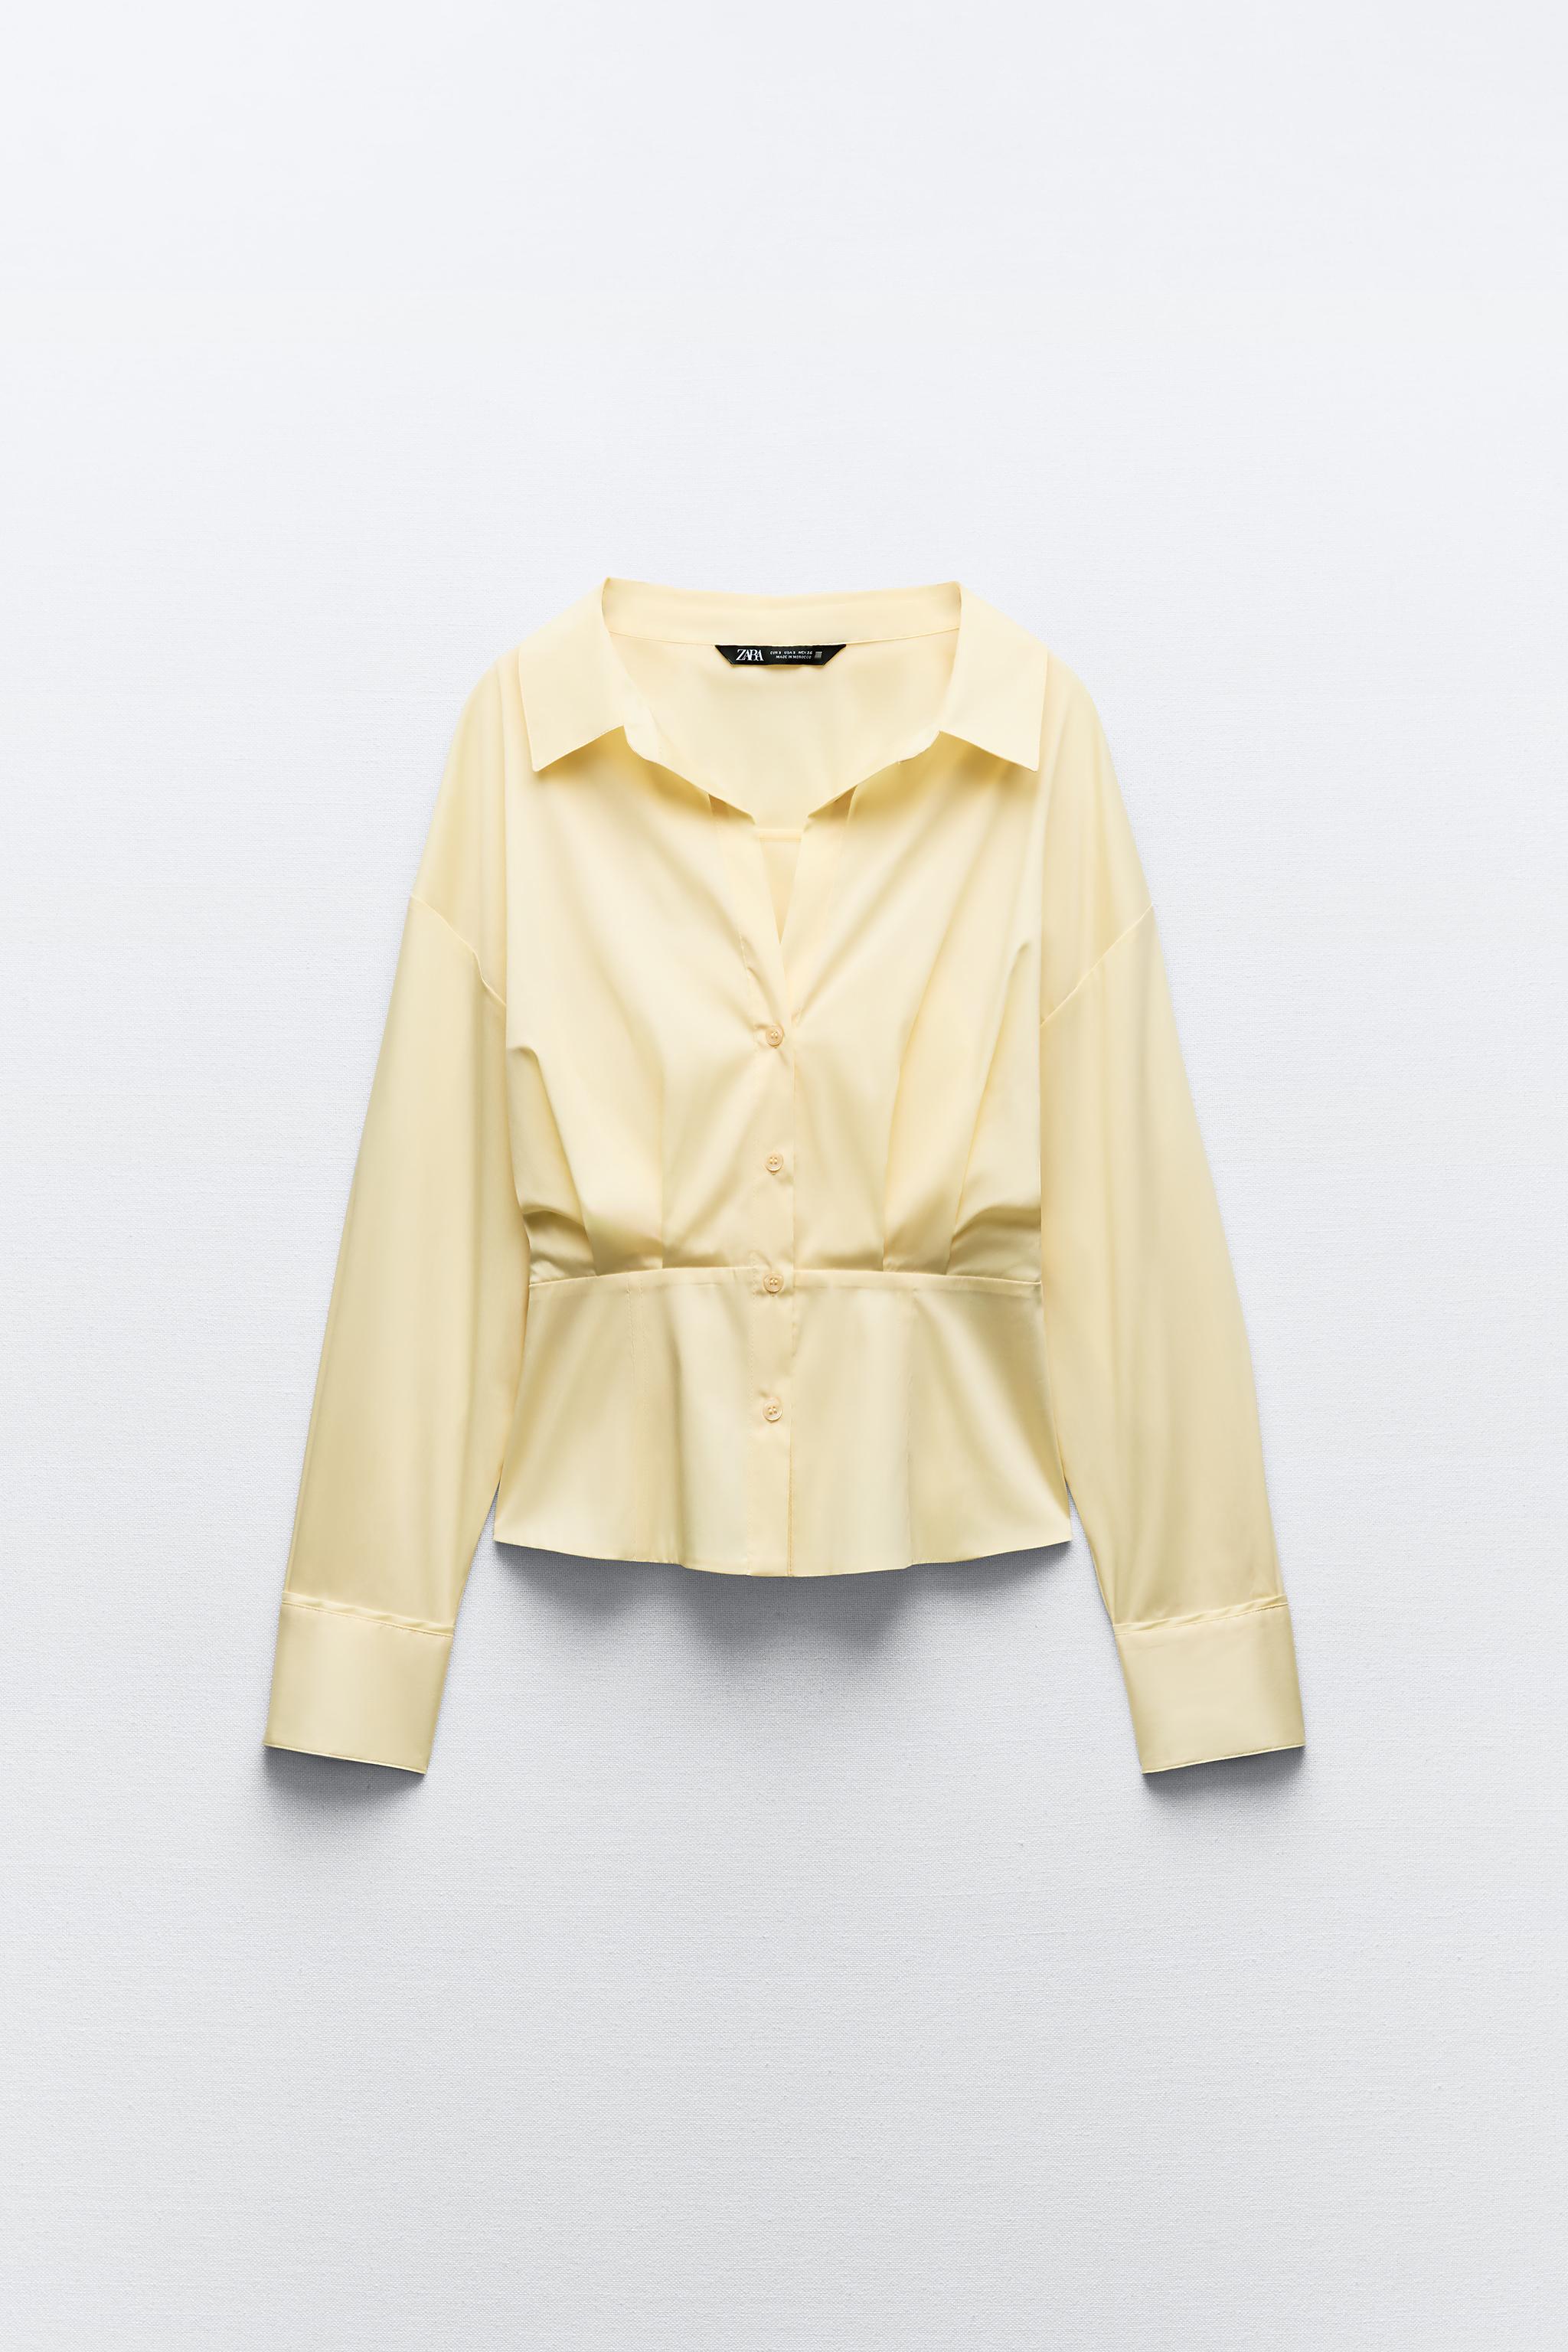 ZW COLLECTION CROSSOVER SHIRT WITH TIE DETAIL - Beige | ZARA India